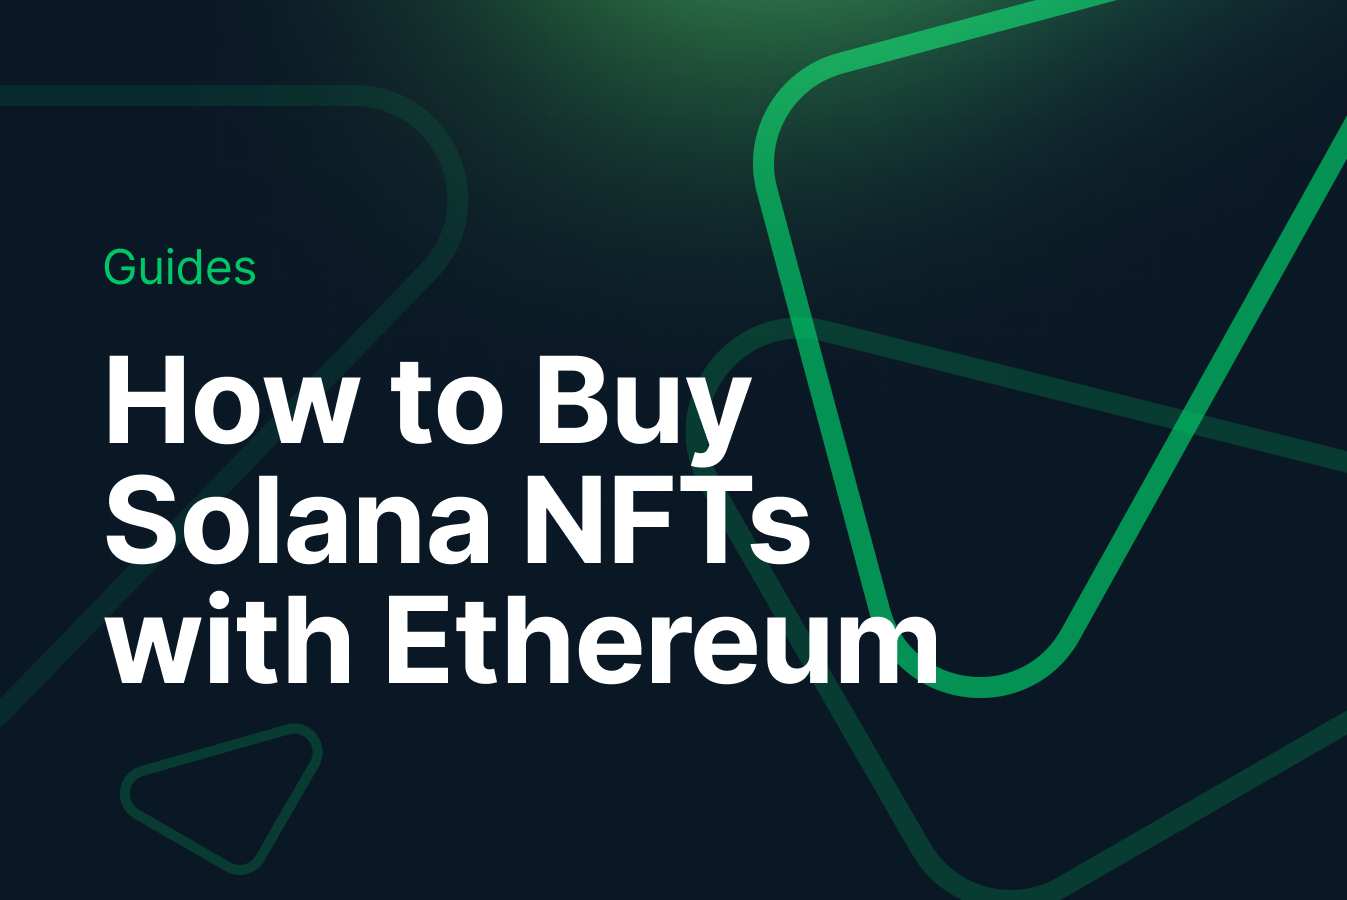 How to Buy Solana NFTs with Ethereum